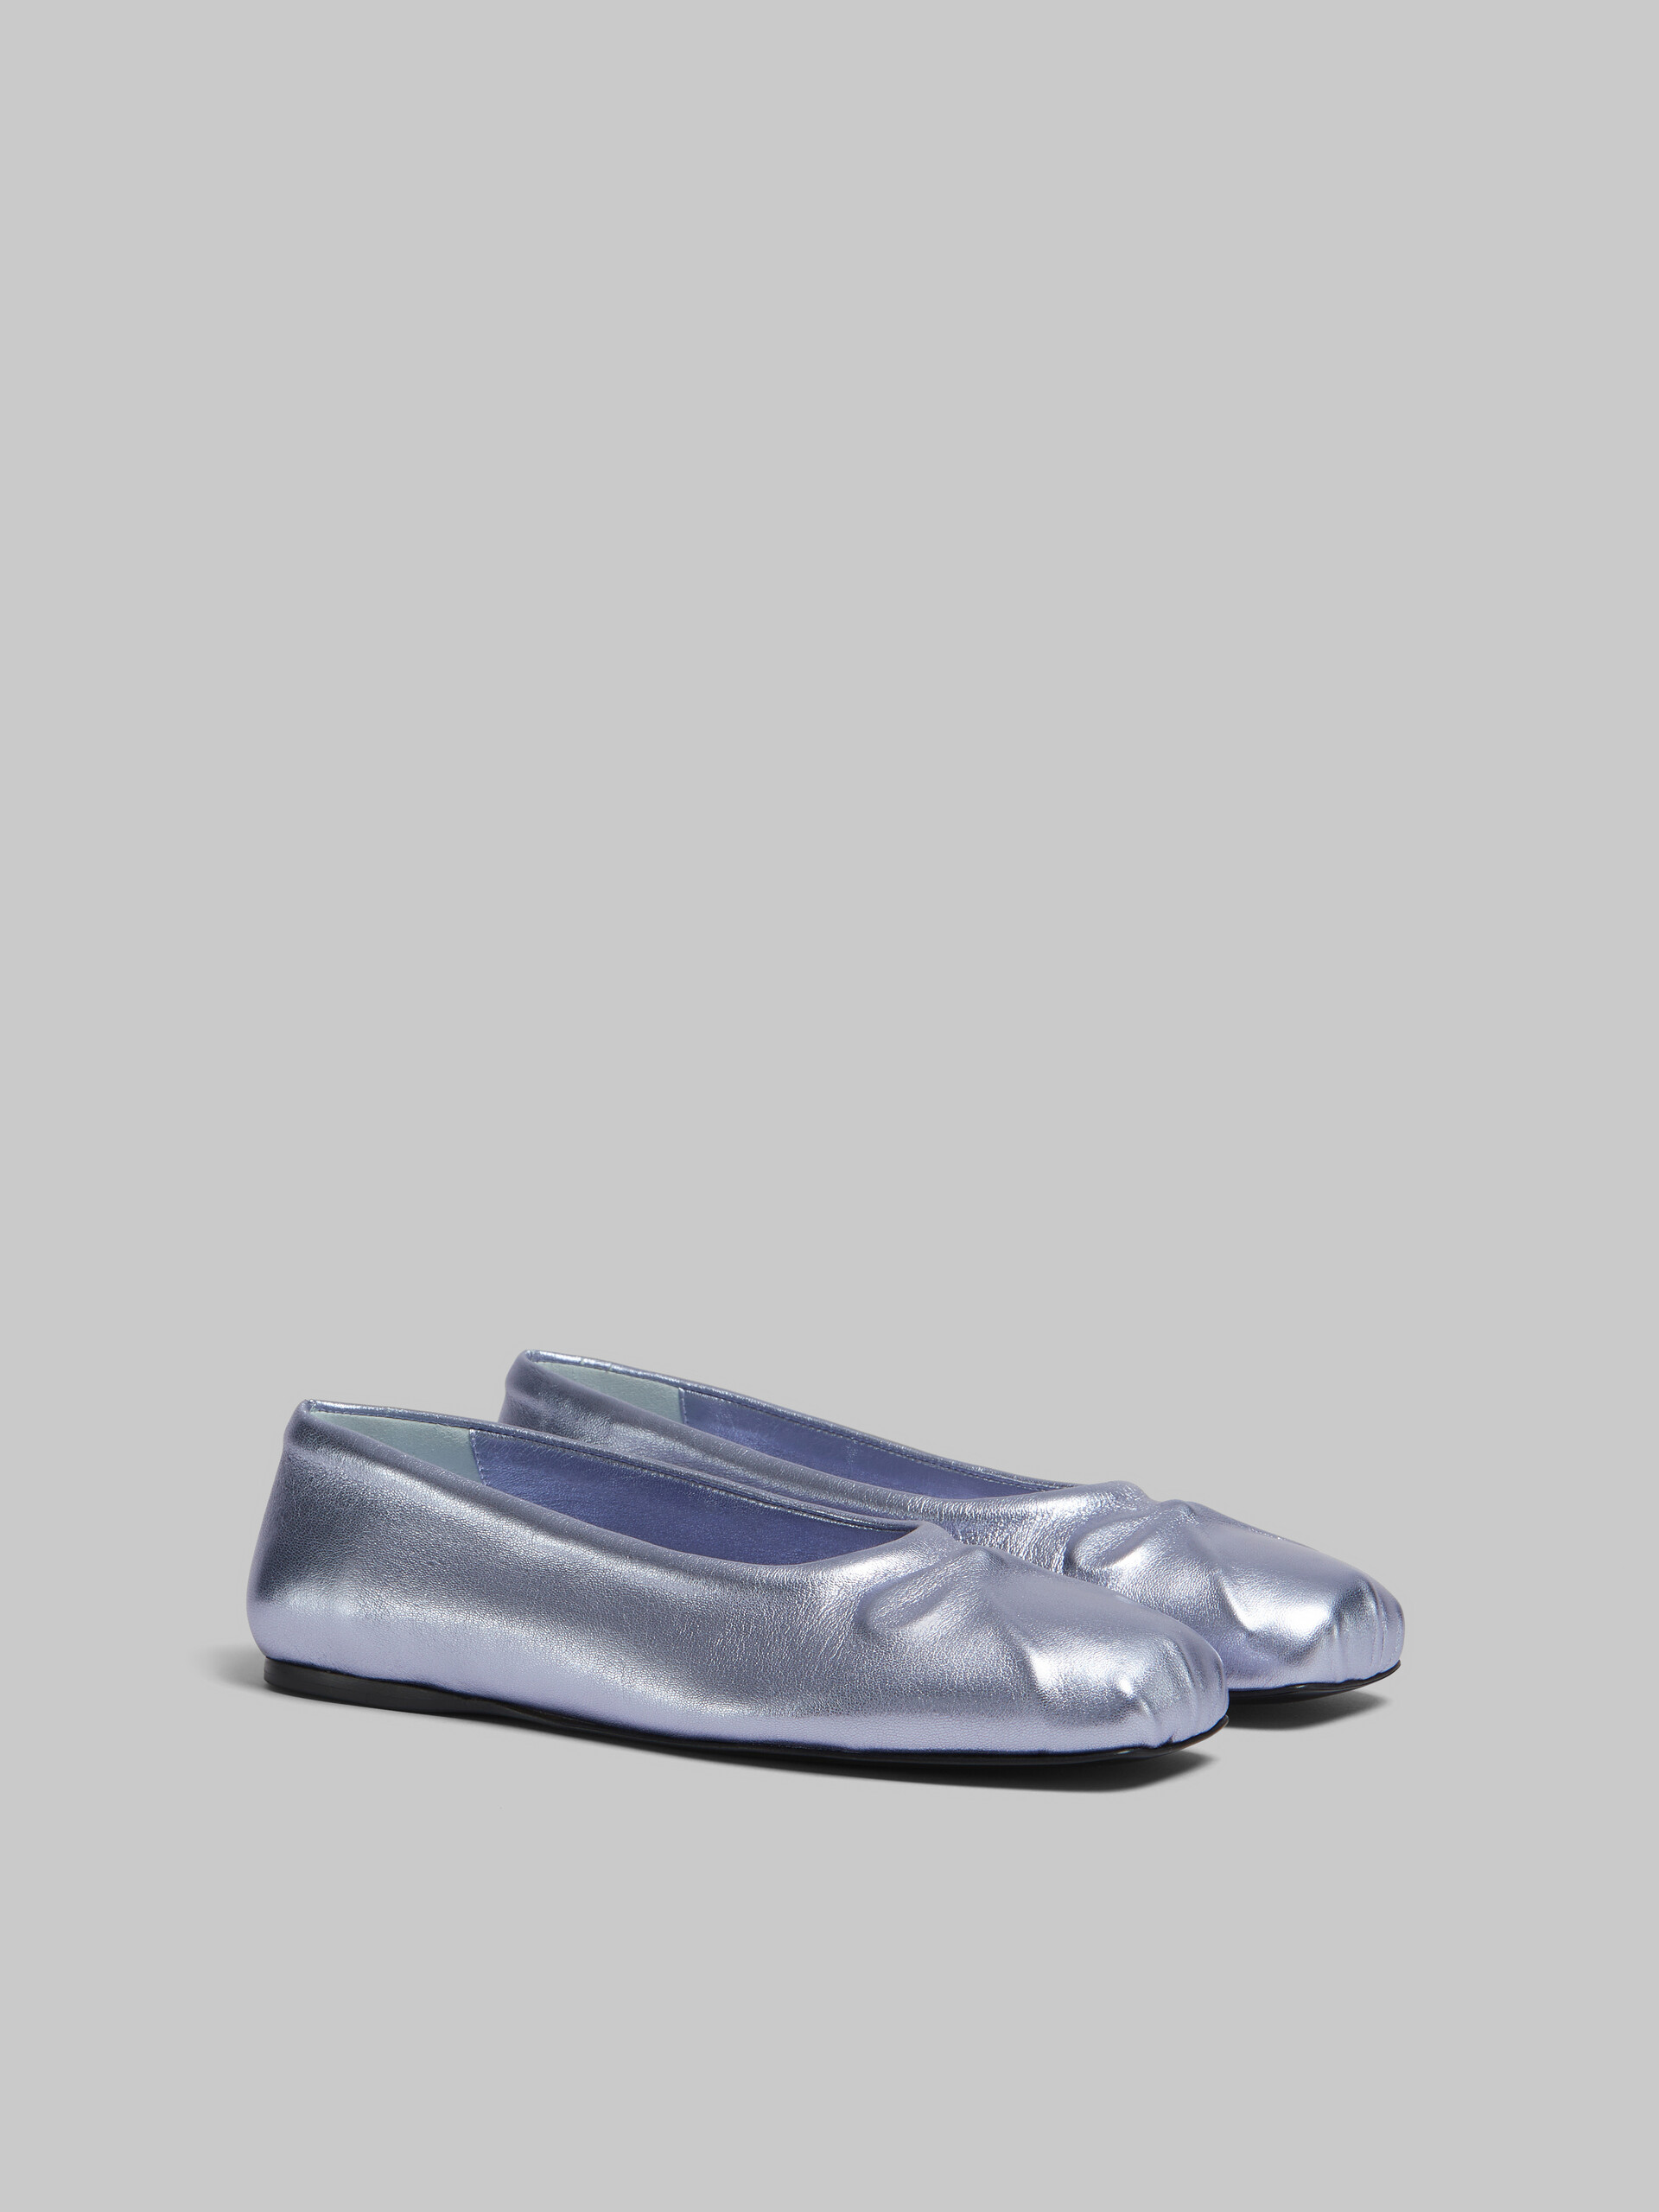 Light blue nappa leather seamless Little Bow ballet flat - Ballet Shoes - Image 2